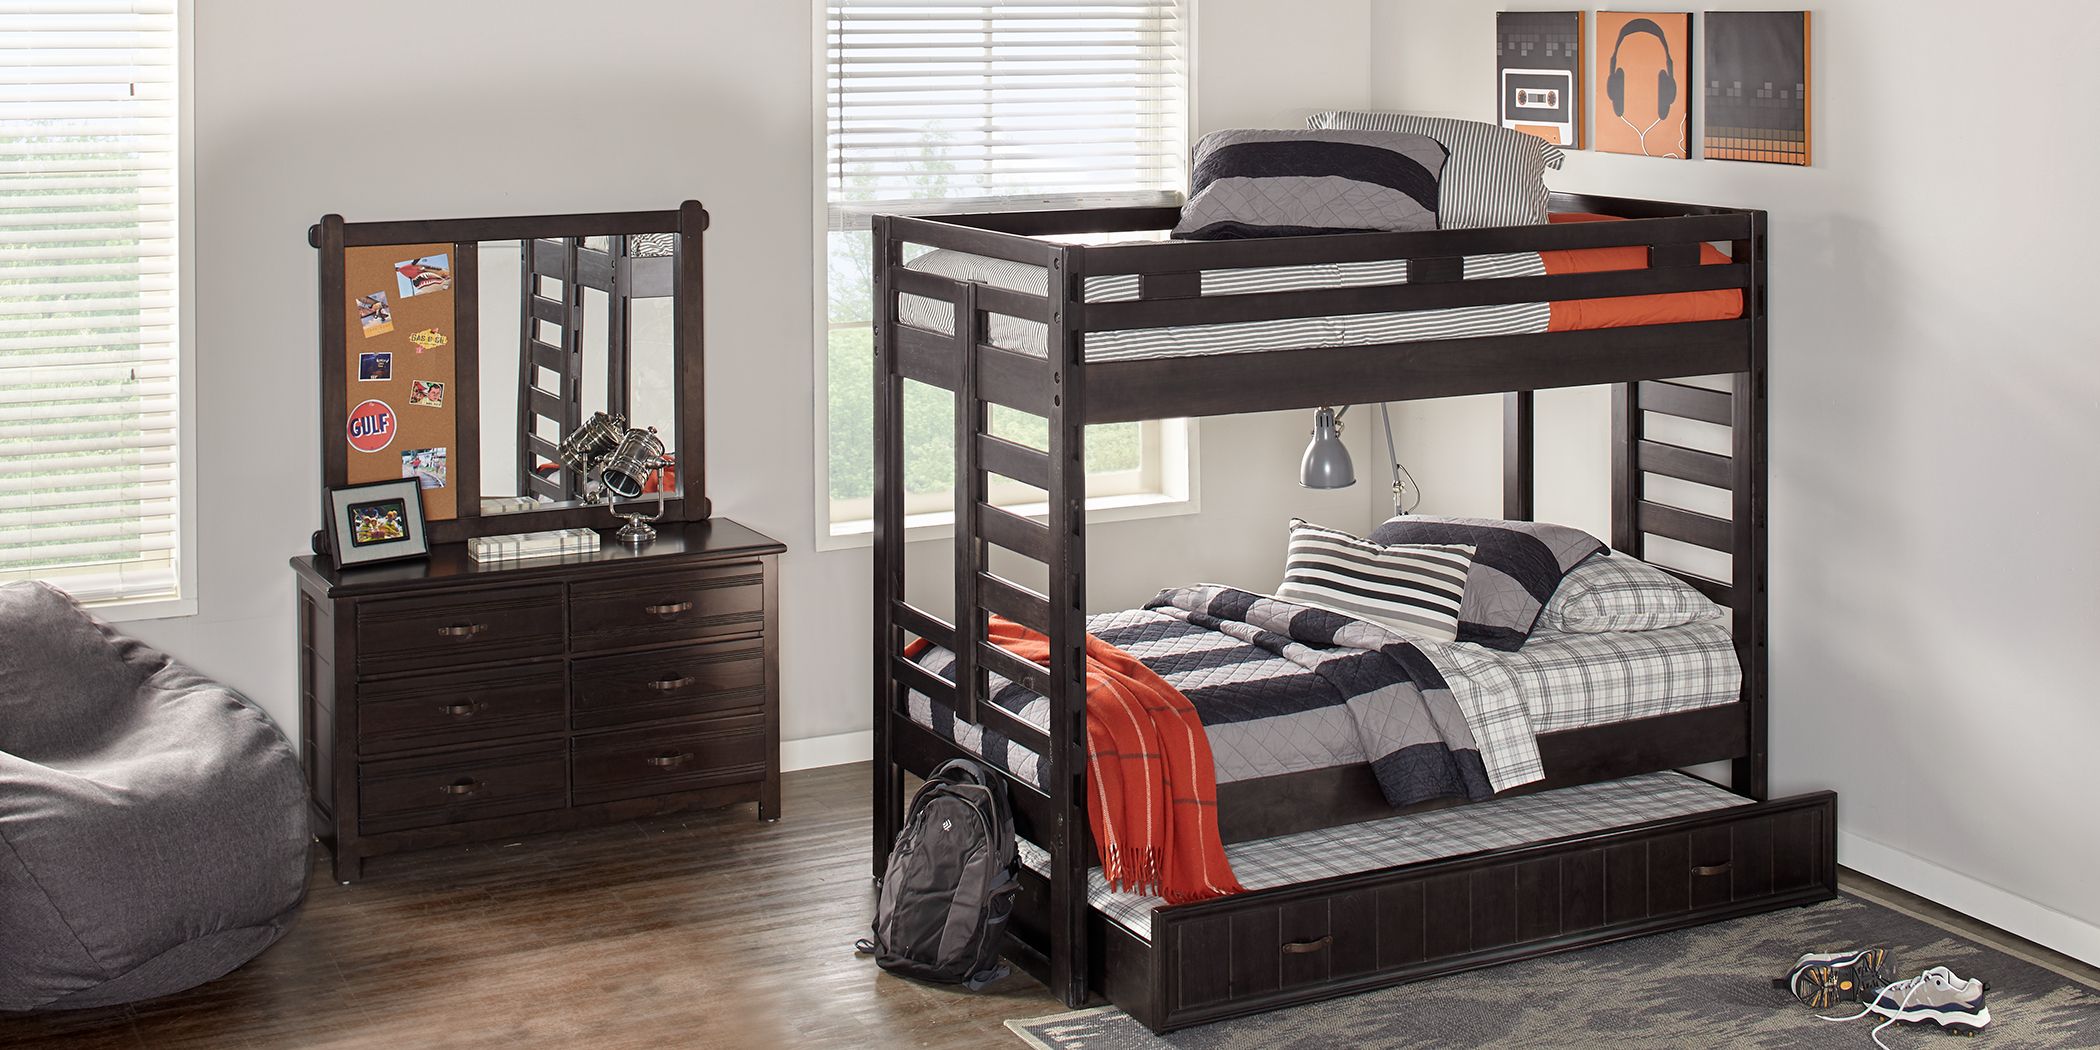 Creekside Furniture Collection Bunk, Creekside Twin Over Full Bunk Bed